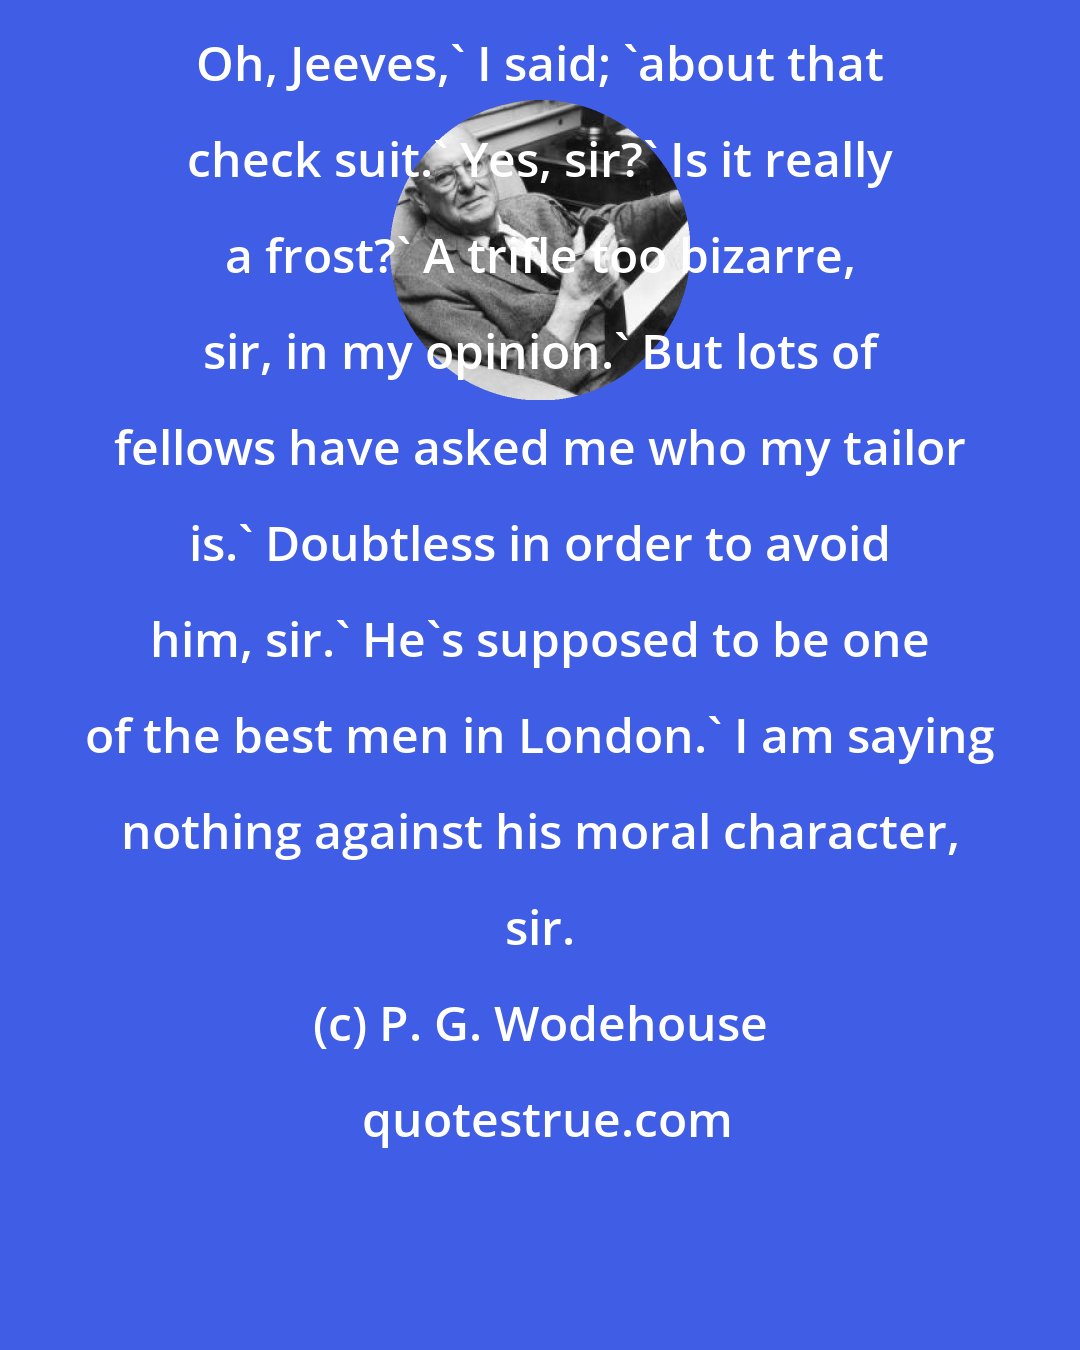 P. G. Wodehouse: Oh, Jeeves,' I said; 'about that check suit.' Yes, sir?' Is it really a frost?' A trifle too bizarre, sir, in my opinion.' But lots of fellows have asked me who my tailor is.' Doubtless in order to avoid him, sir.' He's supposed to be one of the best men in London.' I am saying nothing against his moral character, sir.